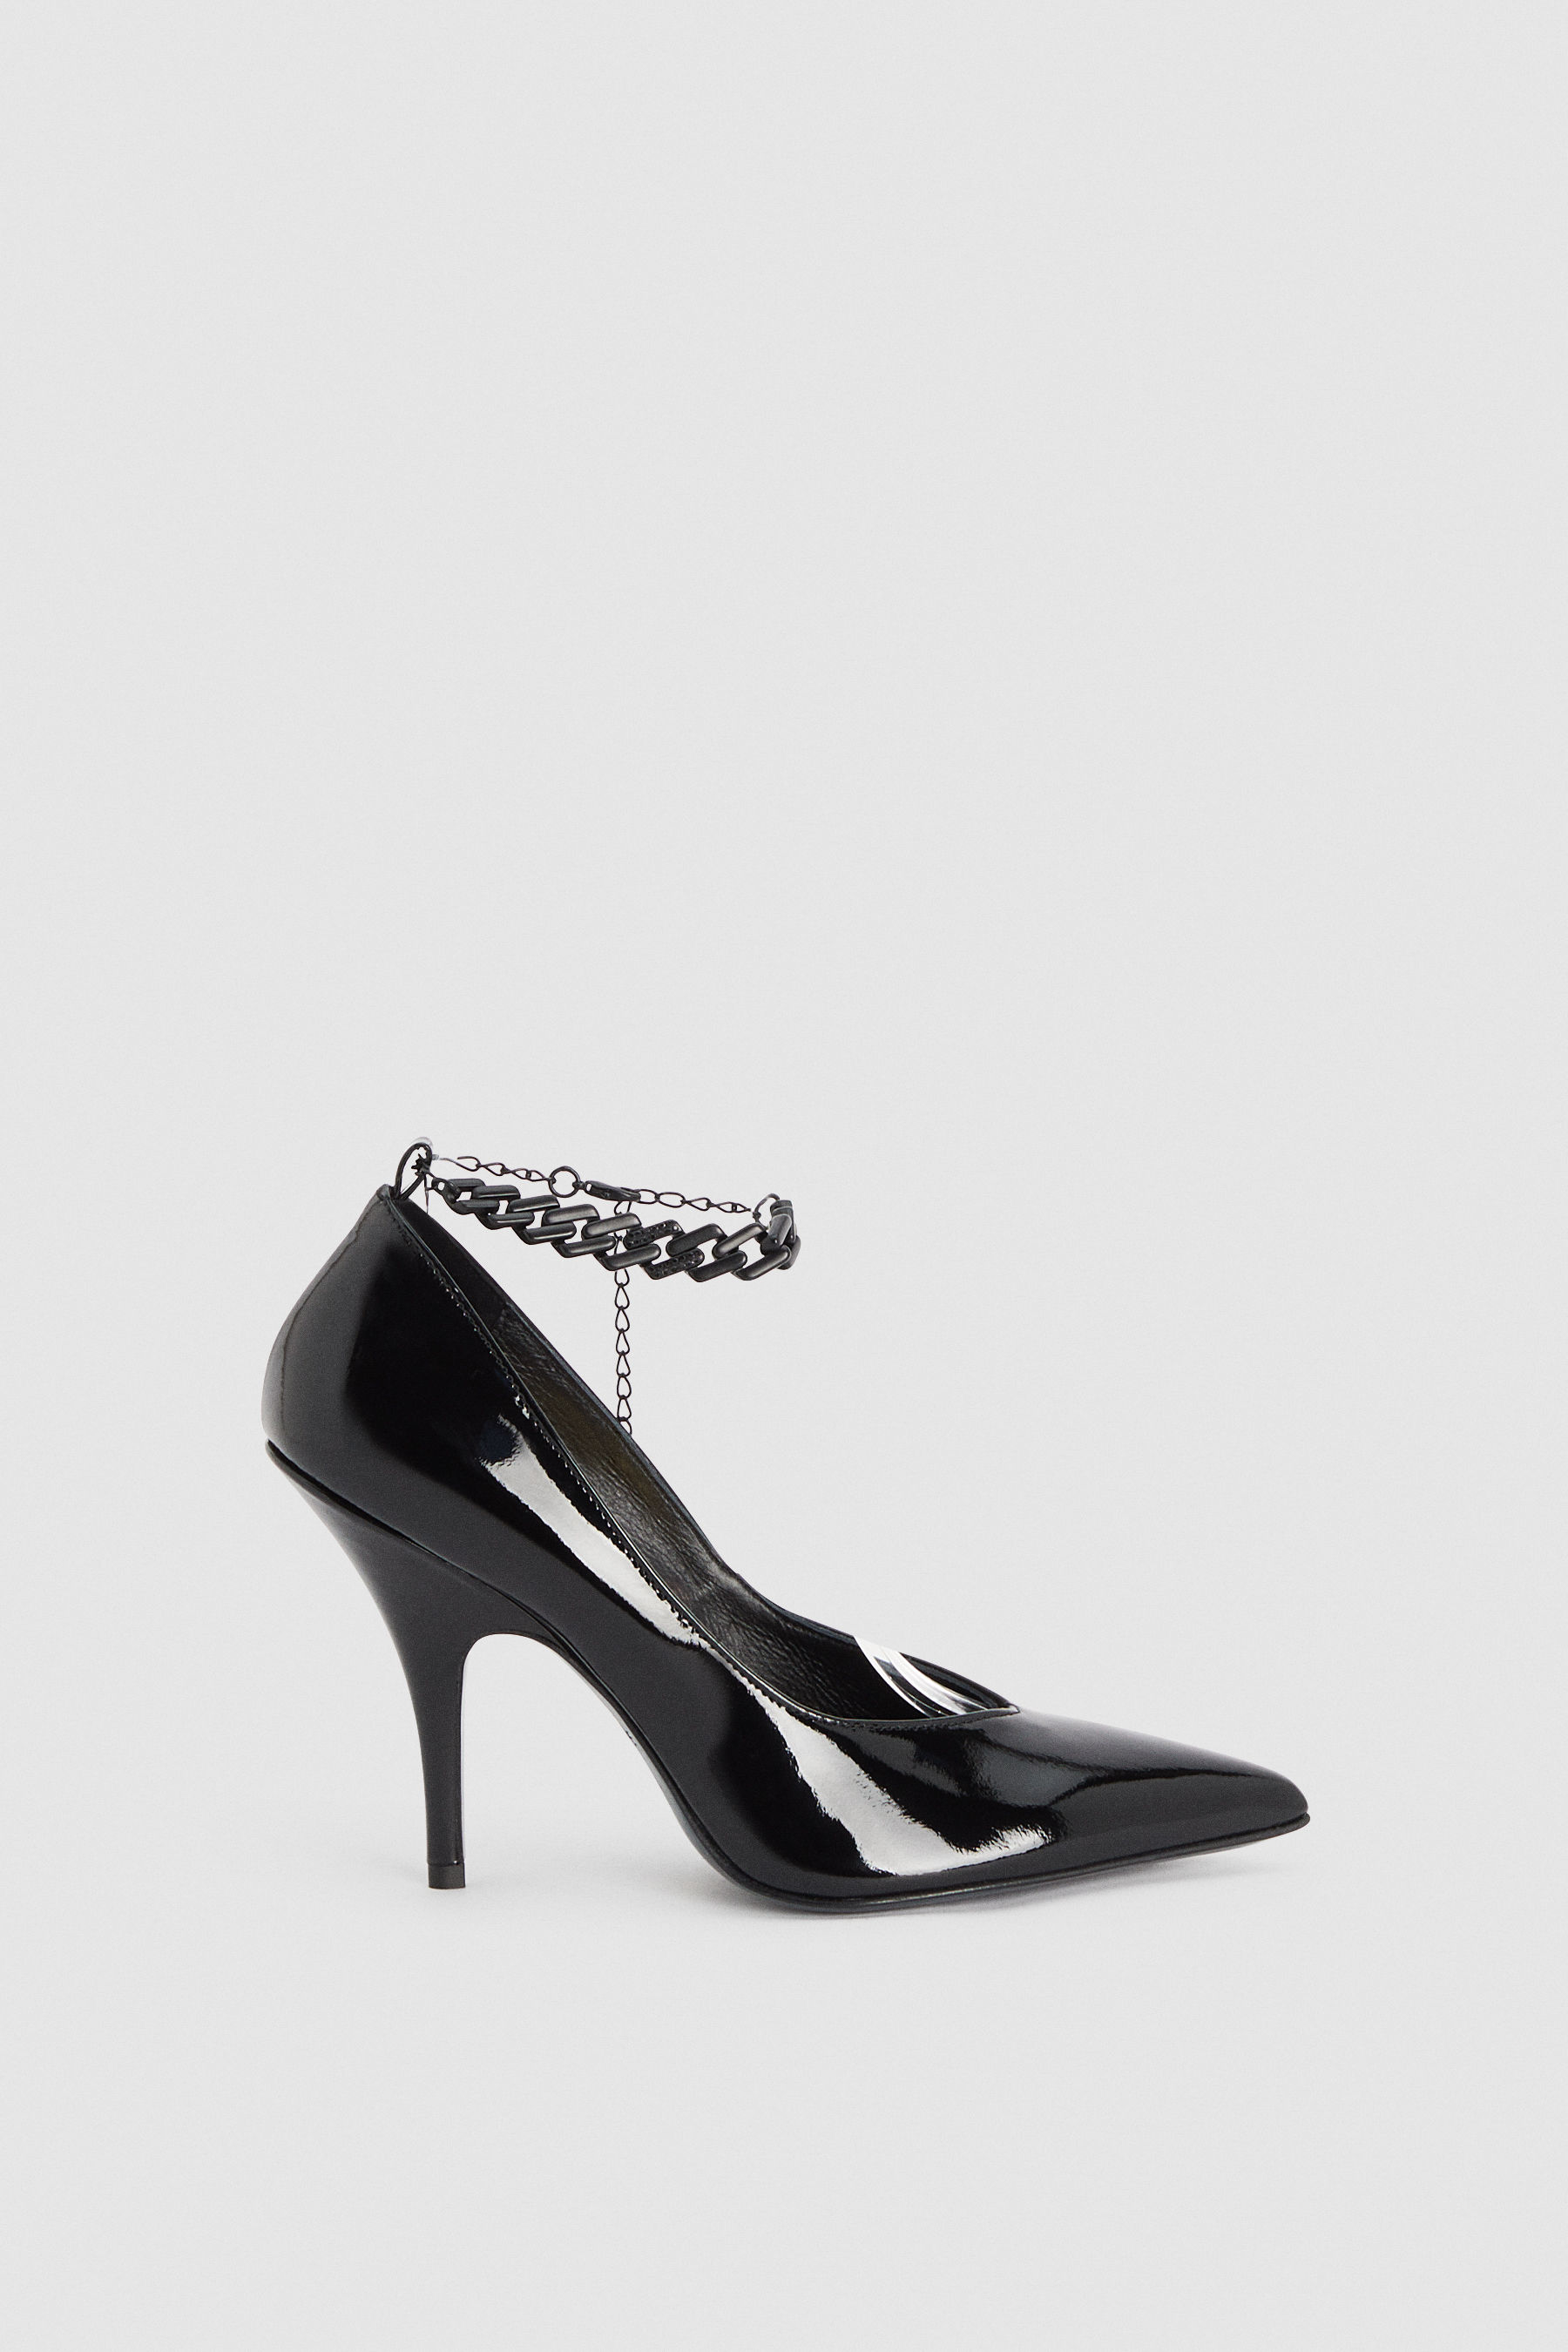 Agrarisch band Uitgaand Patrizia Pepe Sale: Heels & Pumps Shoes